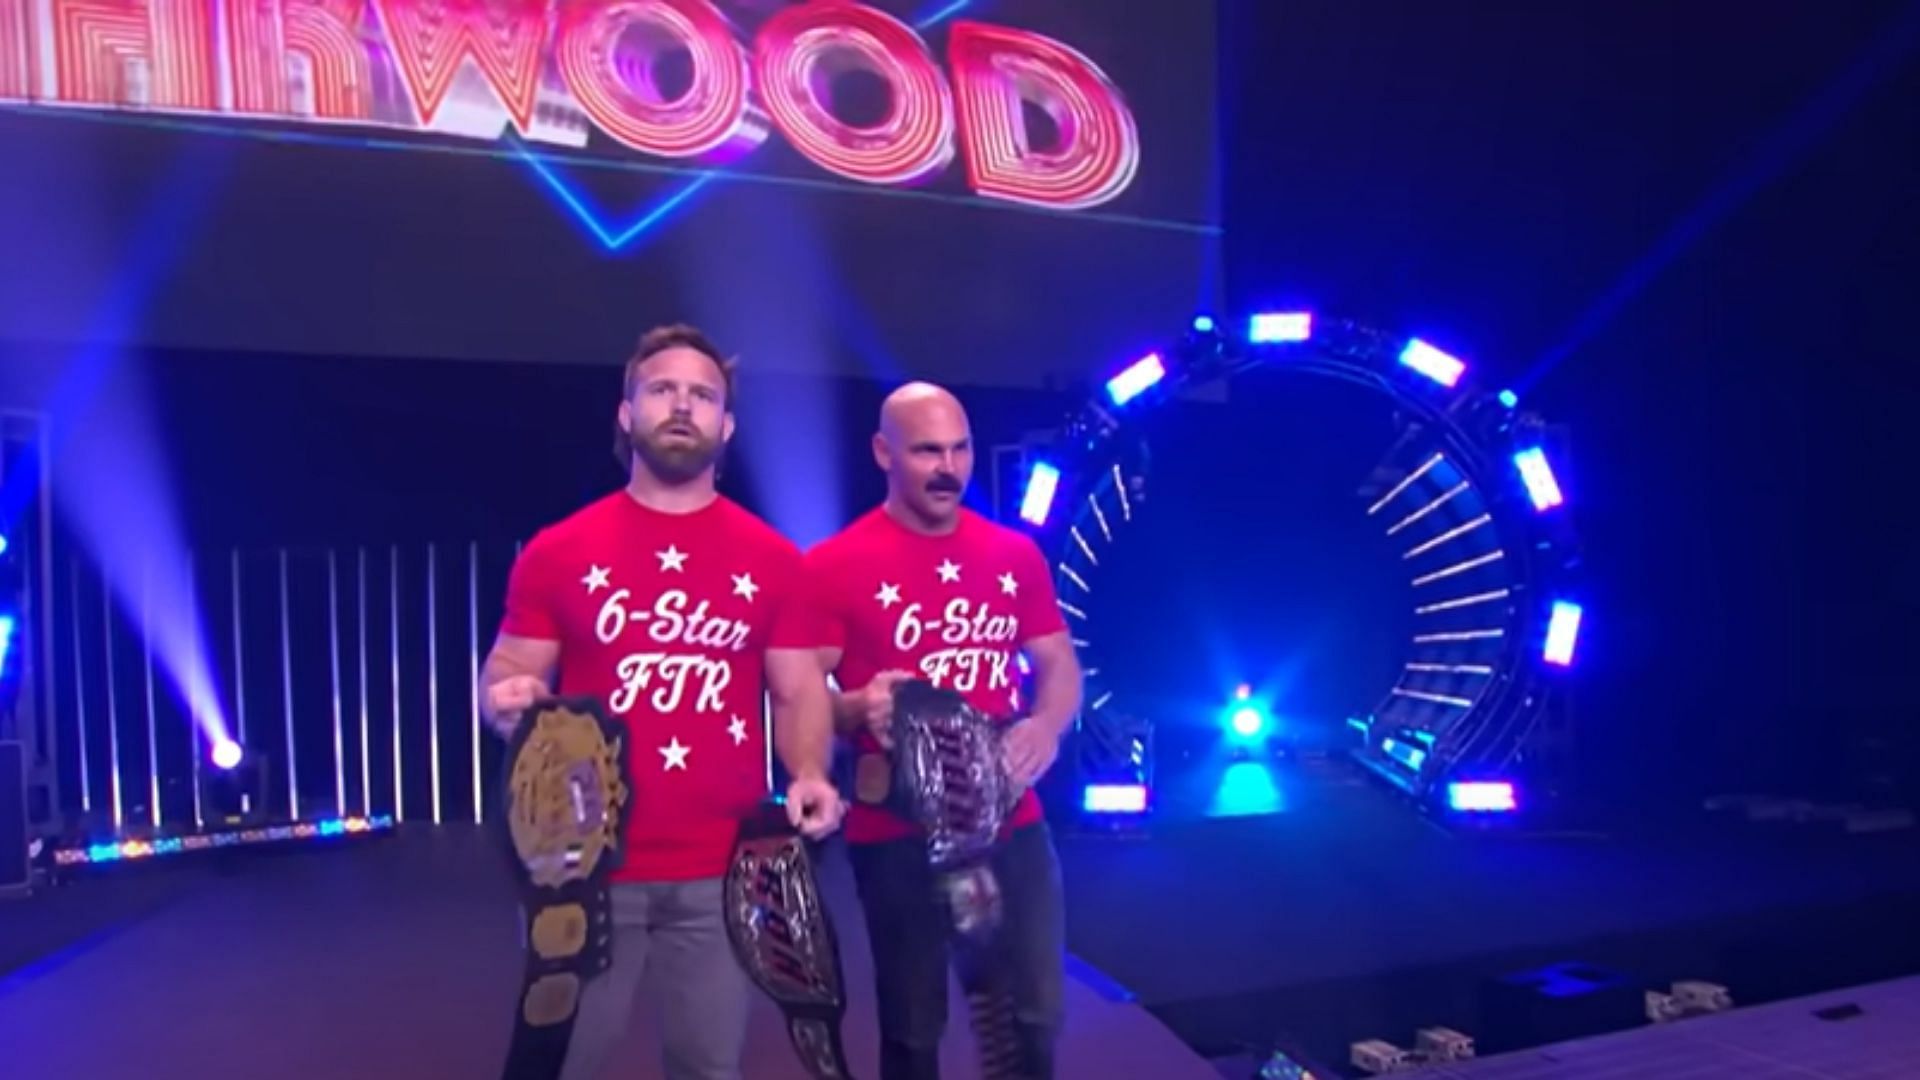 FTR is the current ROH and AAA World Tag Team Champions.